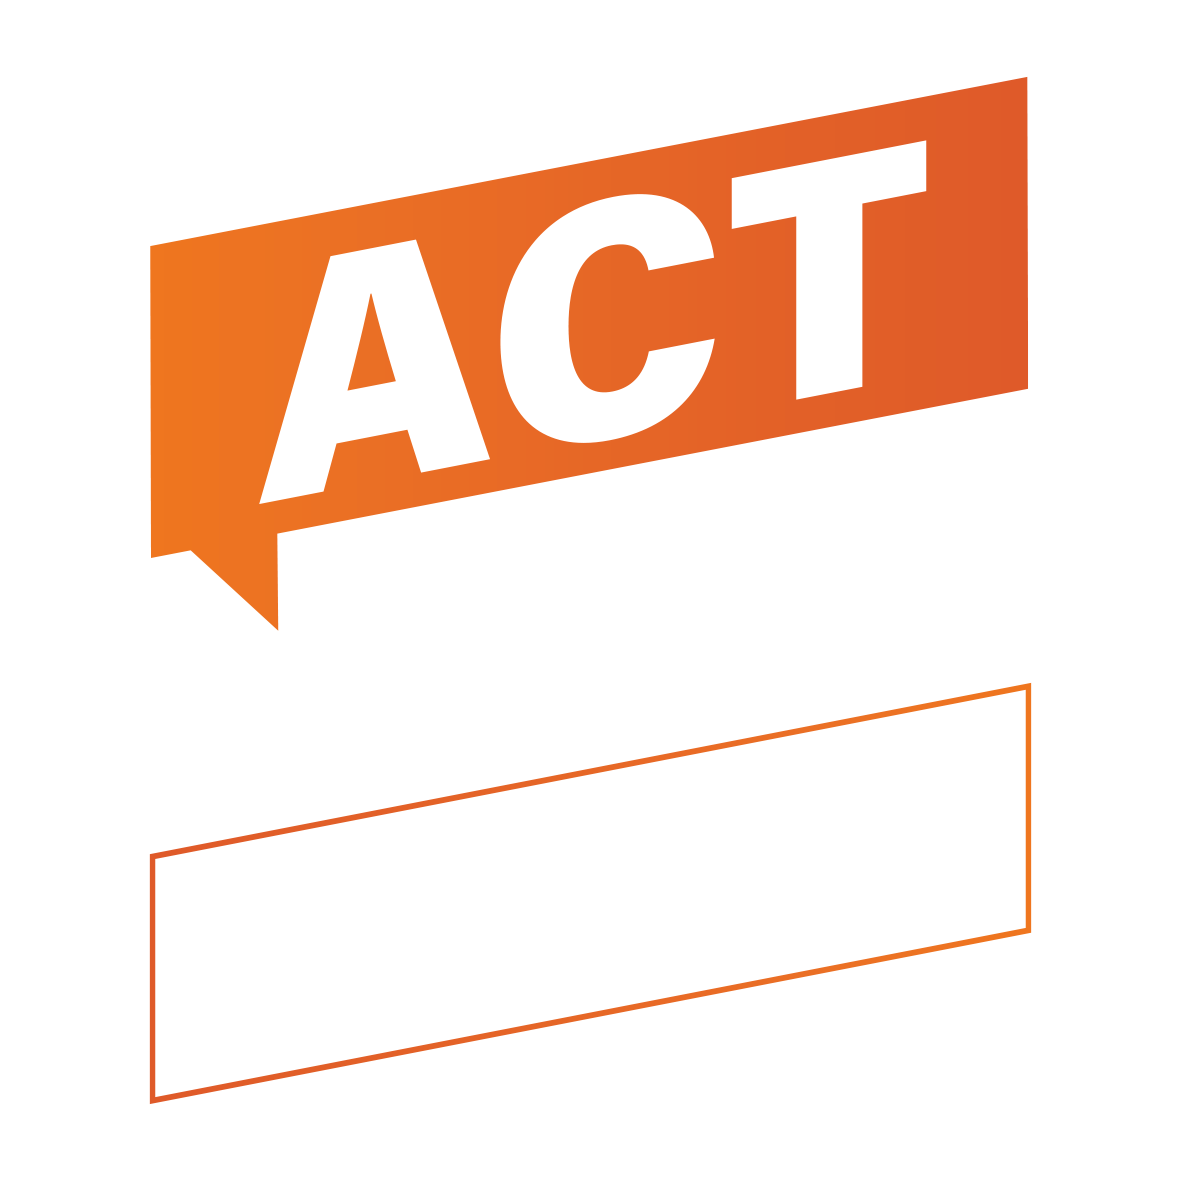 Act on NCDS - The Moment for Caring logo negative